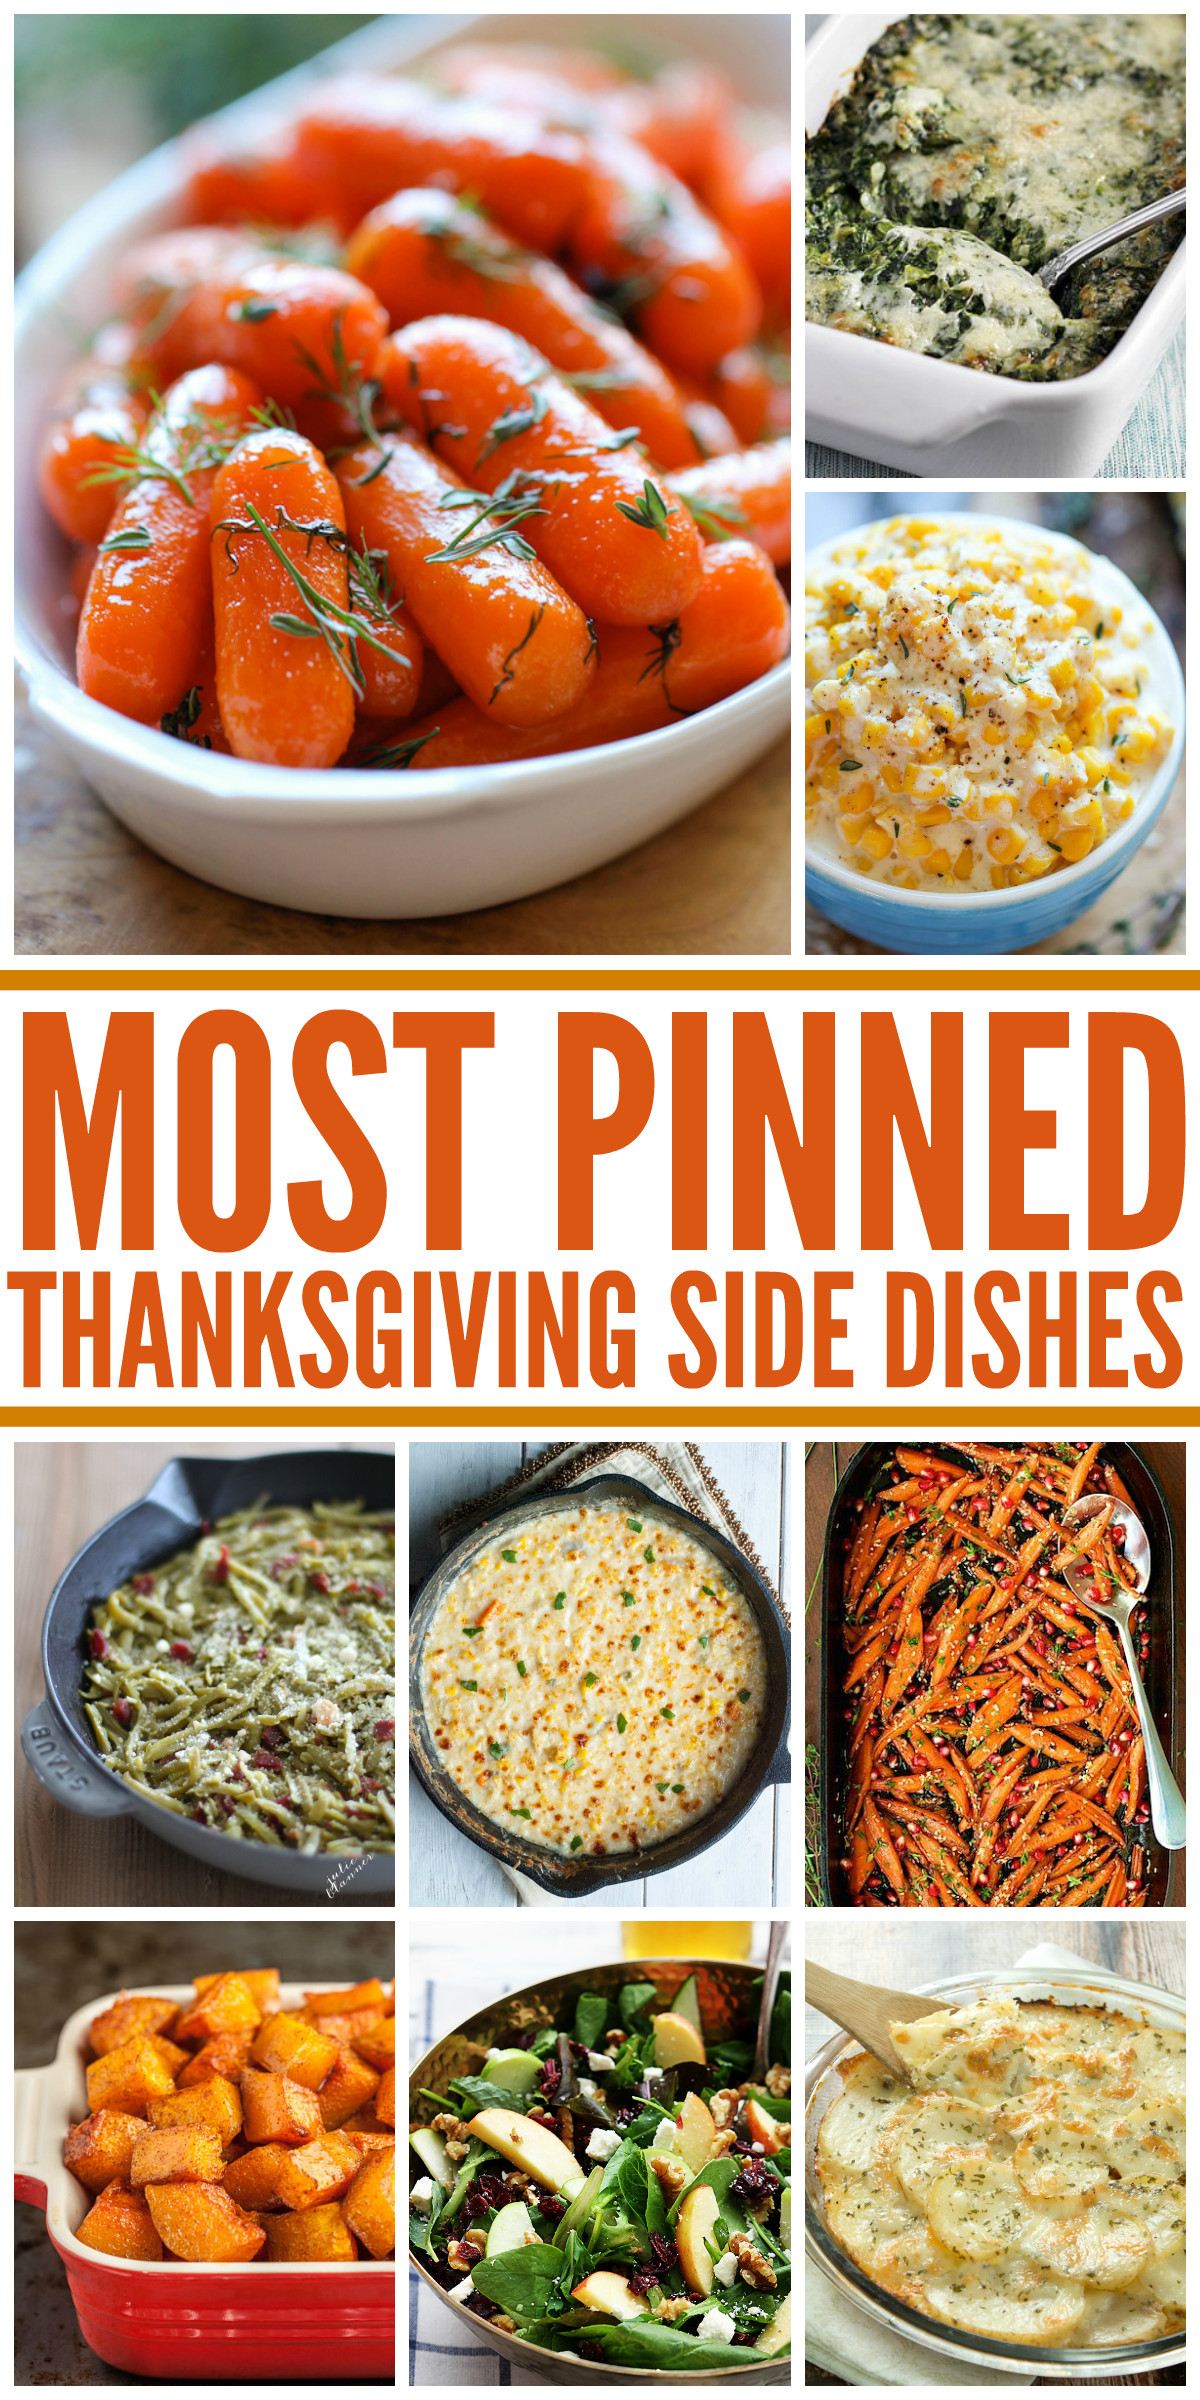 Thanksgiving Dinner Sides Ideas
 25 Most Pinned Holiday Side Dishes